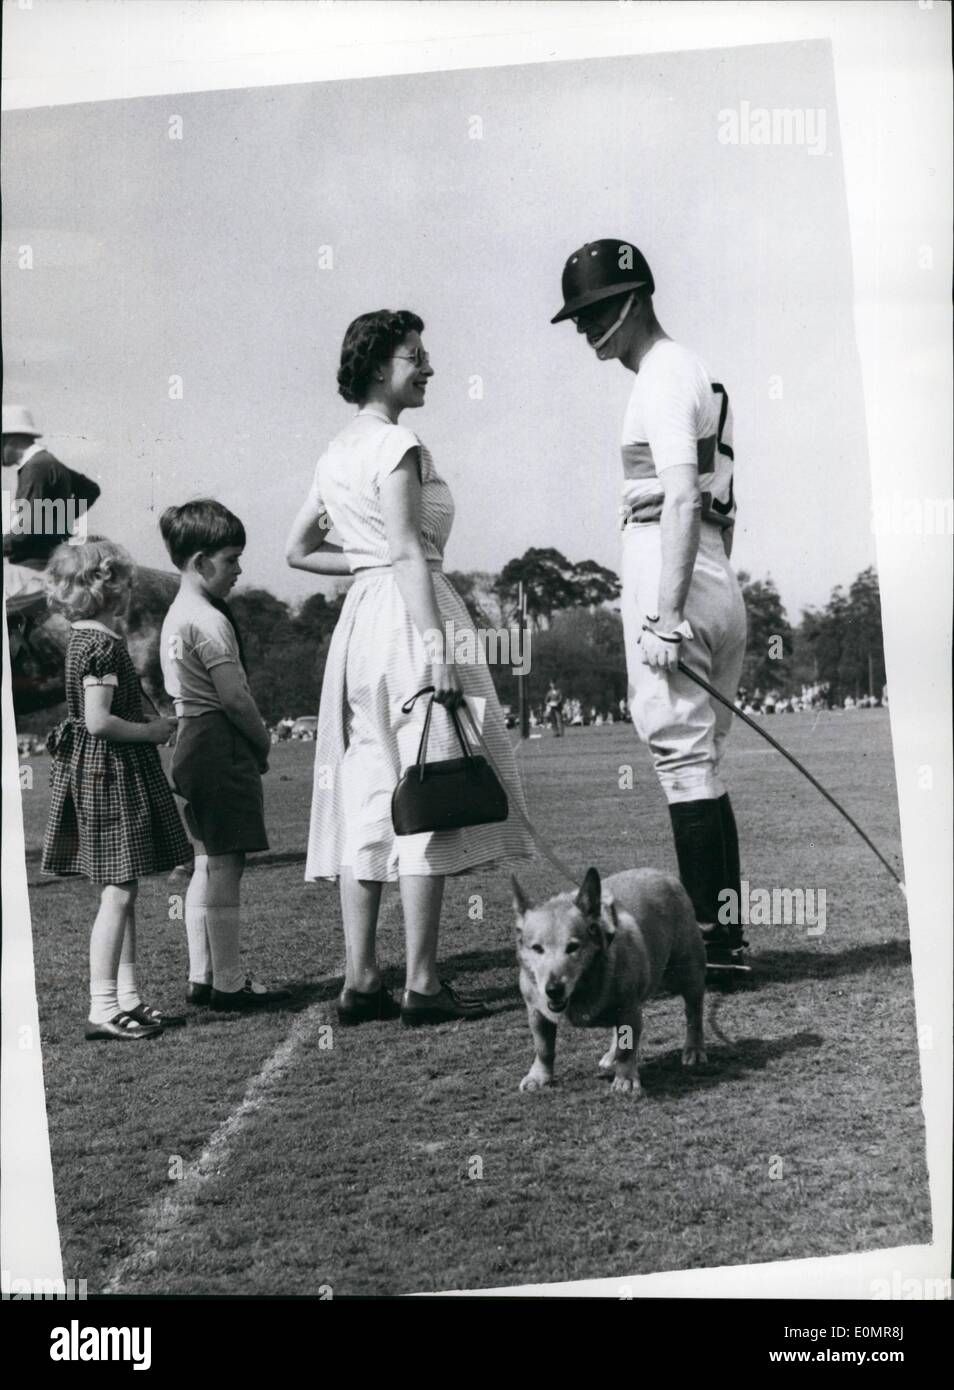 May 05, 1956 - Duke of Edinburgh plays Polo.. Queen and Children attend. The Duke of Edinburgh played Polo on Smith's Lawn in Windsor Great Park. The Queen and the two Royal children watched the game. Keystone Photo Shows:- The Queen goes over to chat to the Duke between Chukkers accompanied by Prince Charles and Princess Anne. Stock Photo